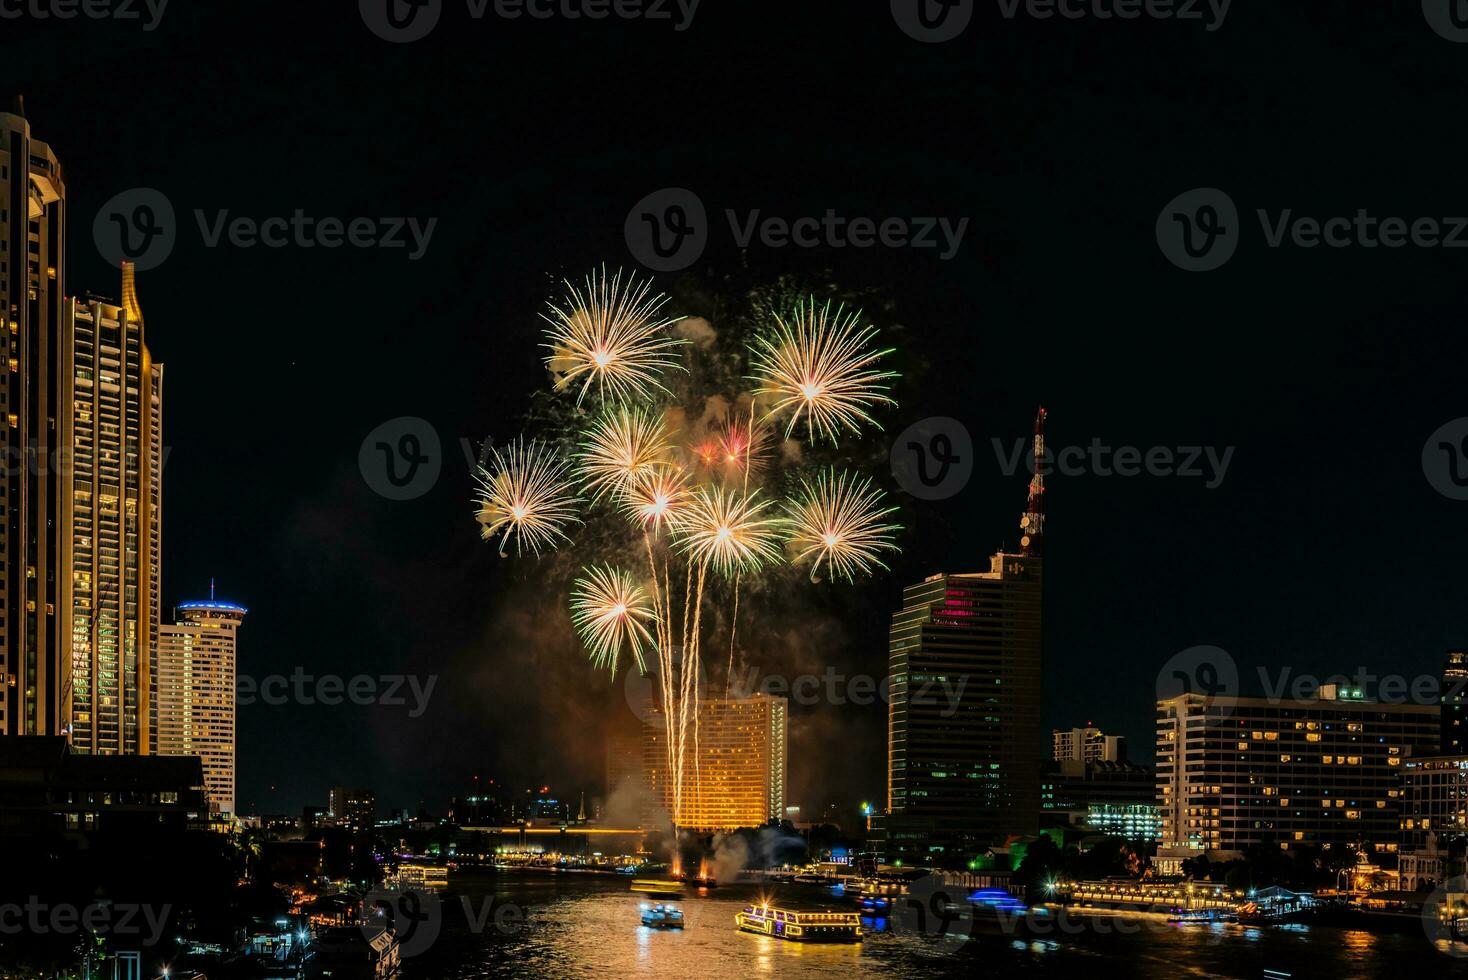 fireworks on the river in the dark sky photo